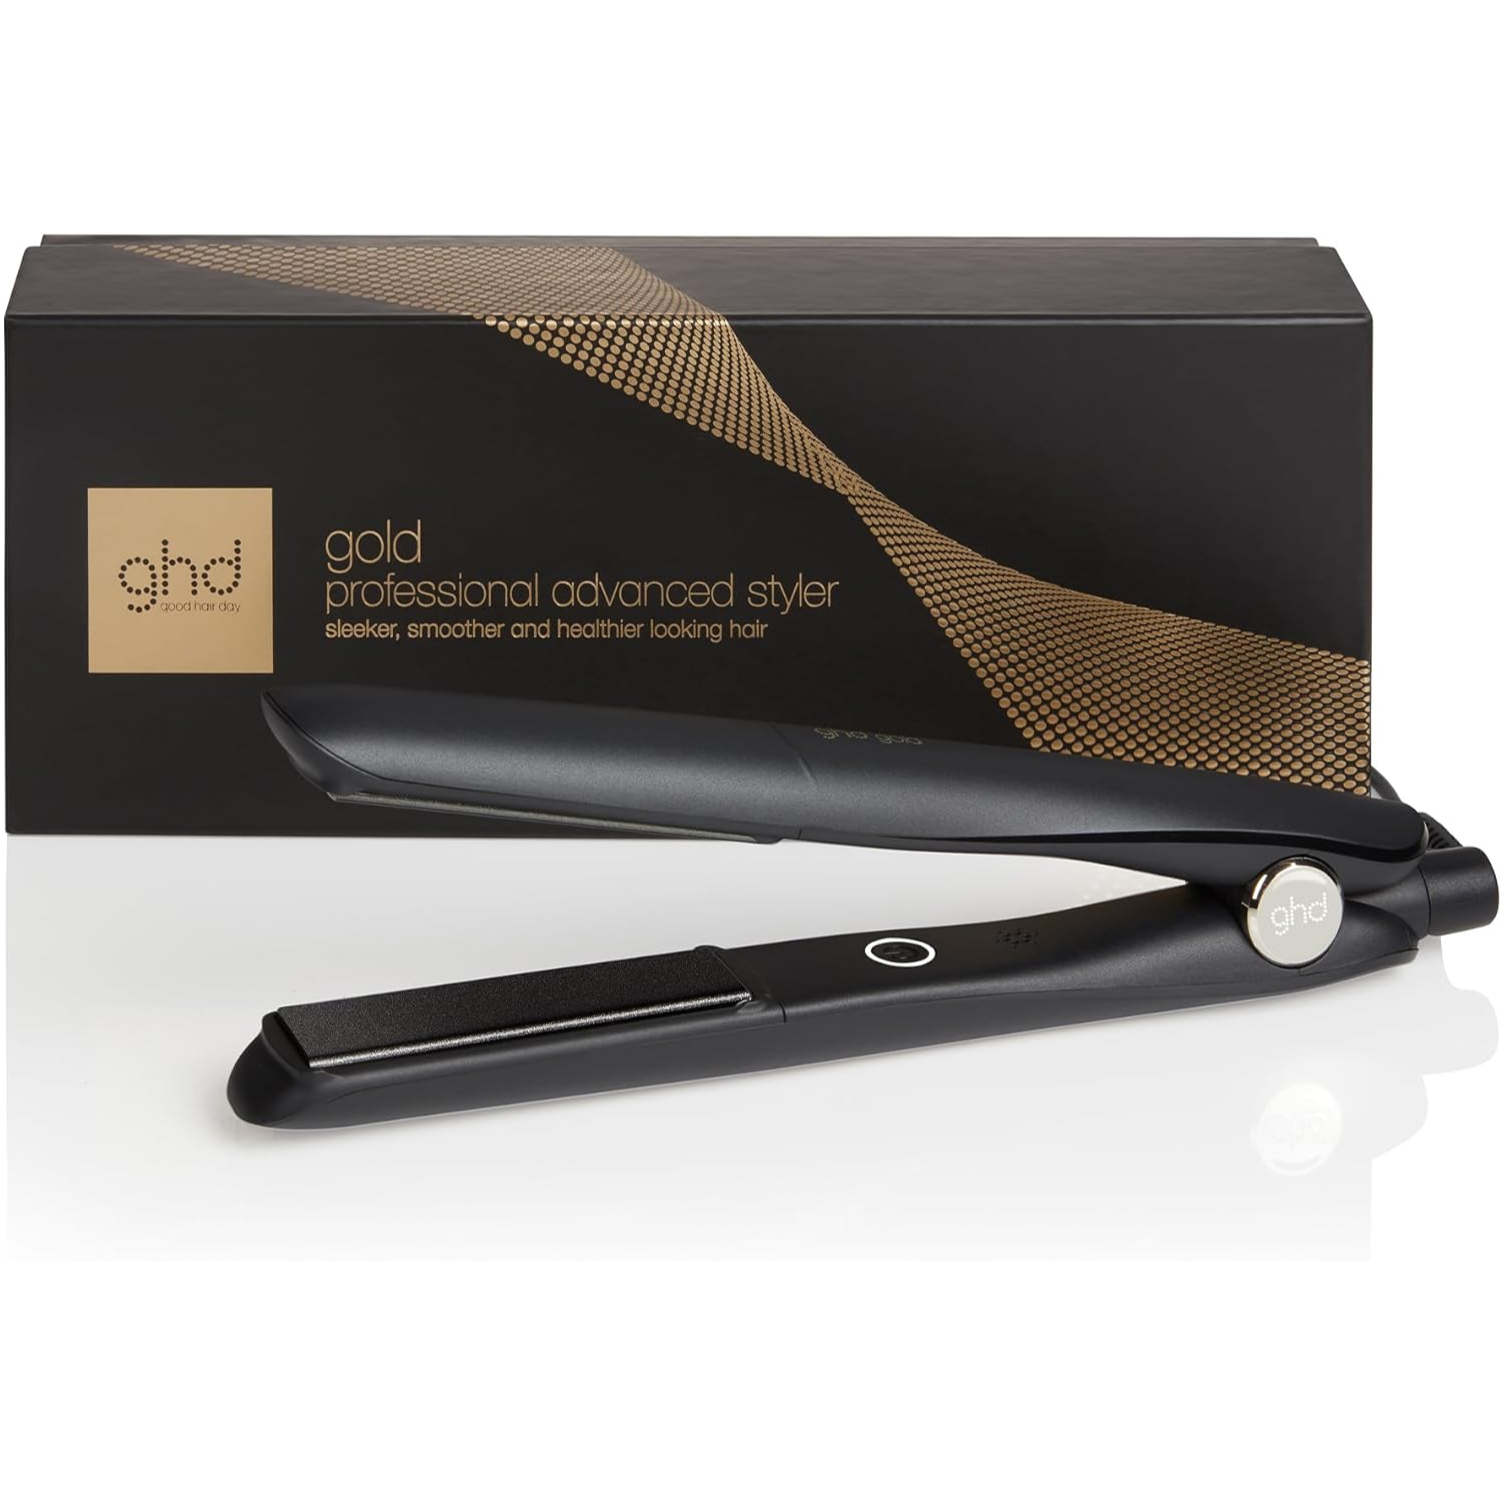 ghd Platinum+ vs ghd Gold: our beauty experts' verdict | Woman & Home